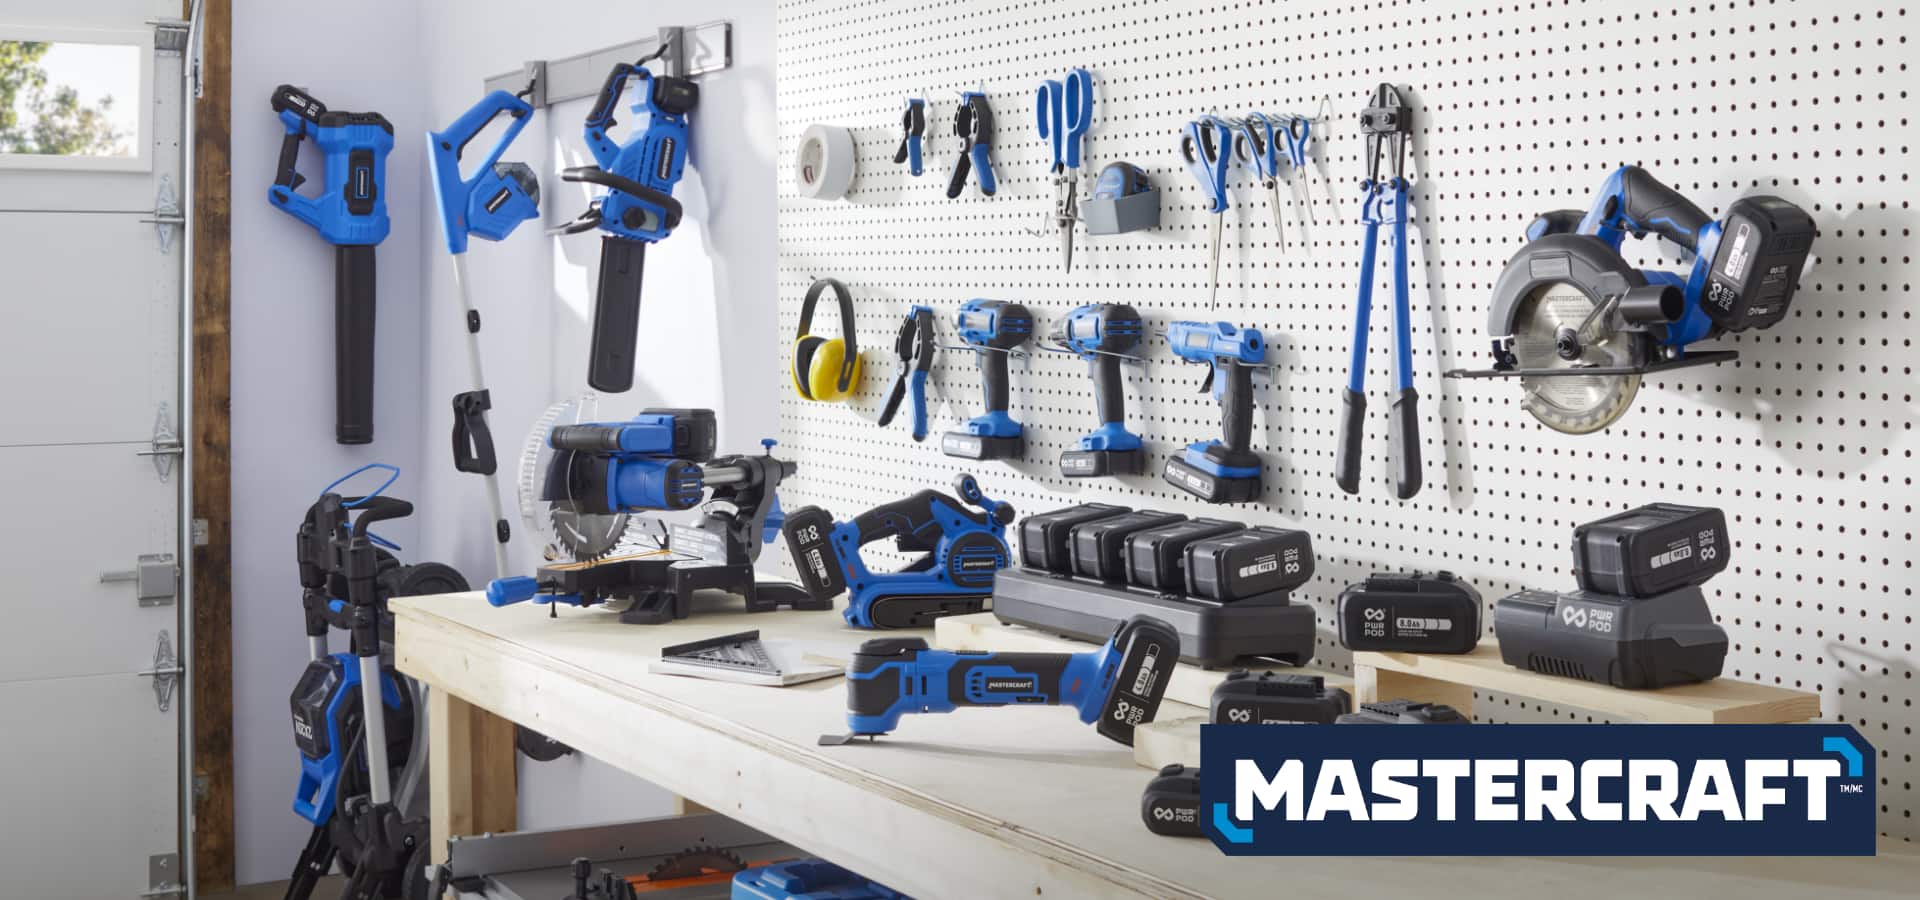 Assortment of Mastercraft tools and PWR POD batteries on garage workbench 